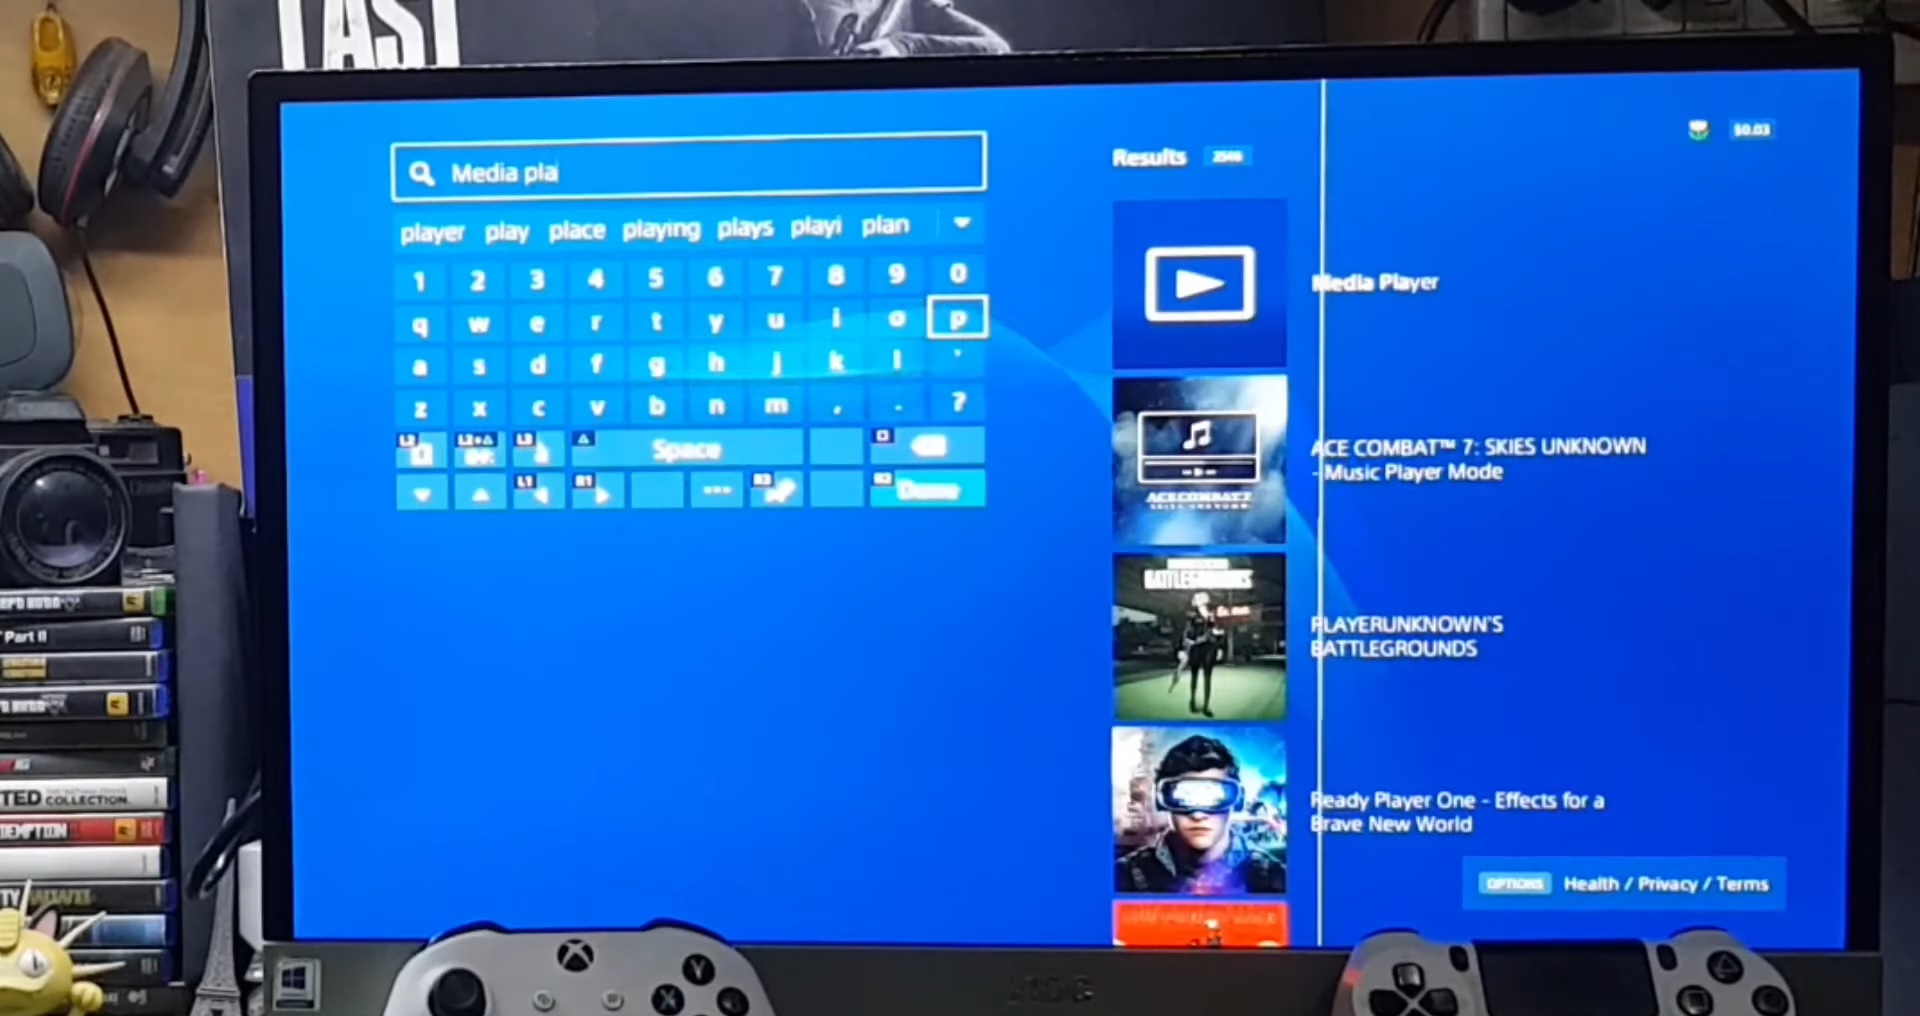 On-screen keyboard PS Store search